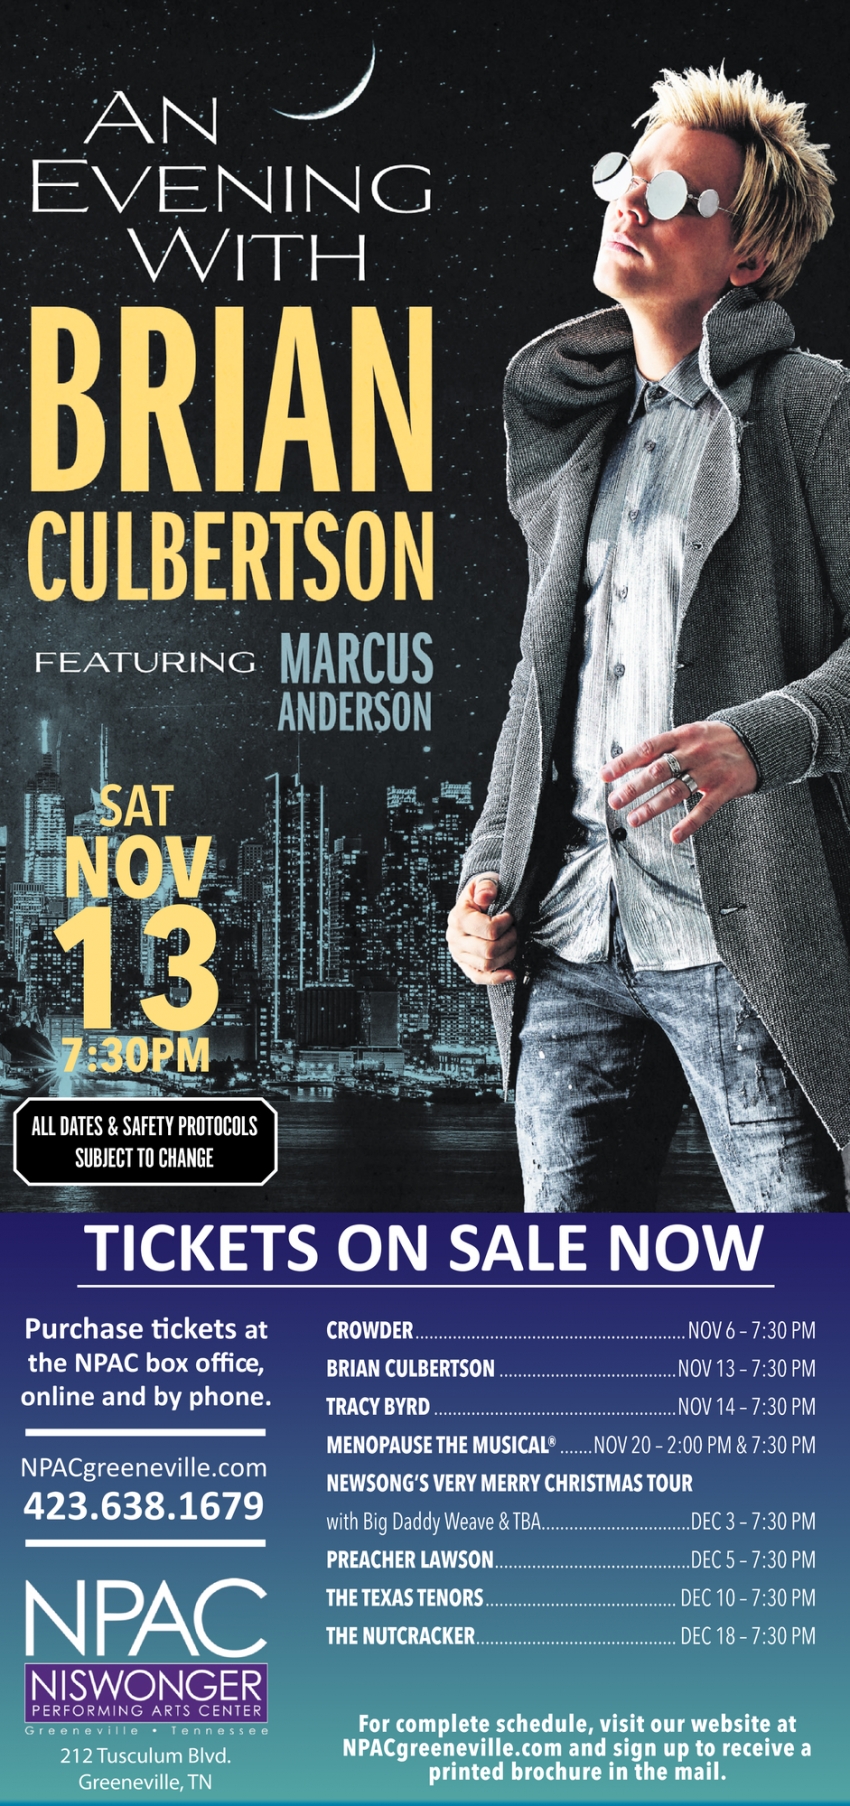 An Evening With Brian Culbertson